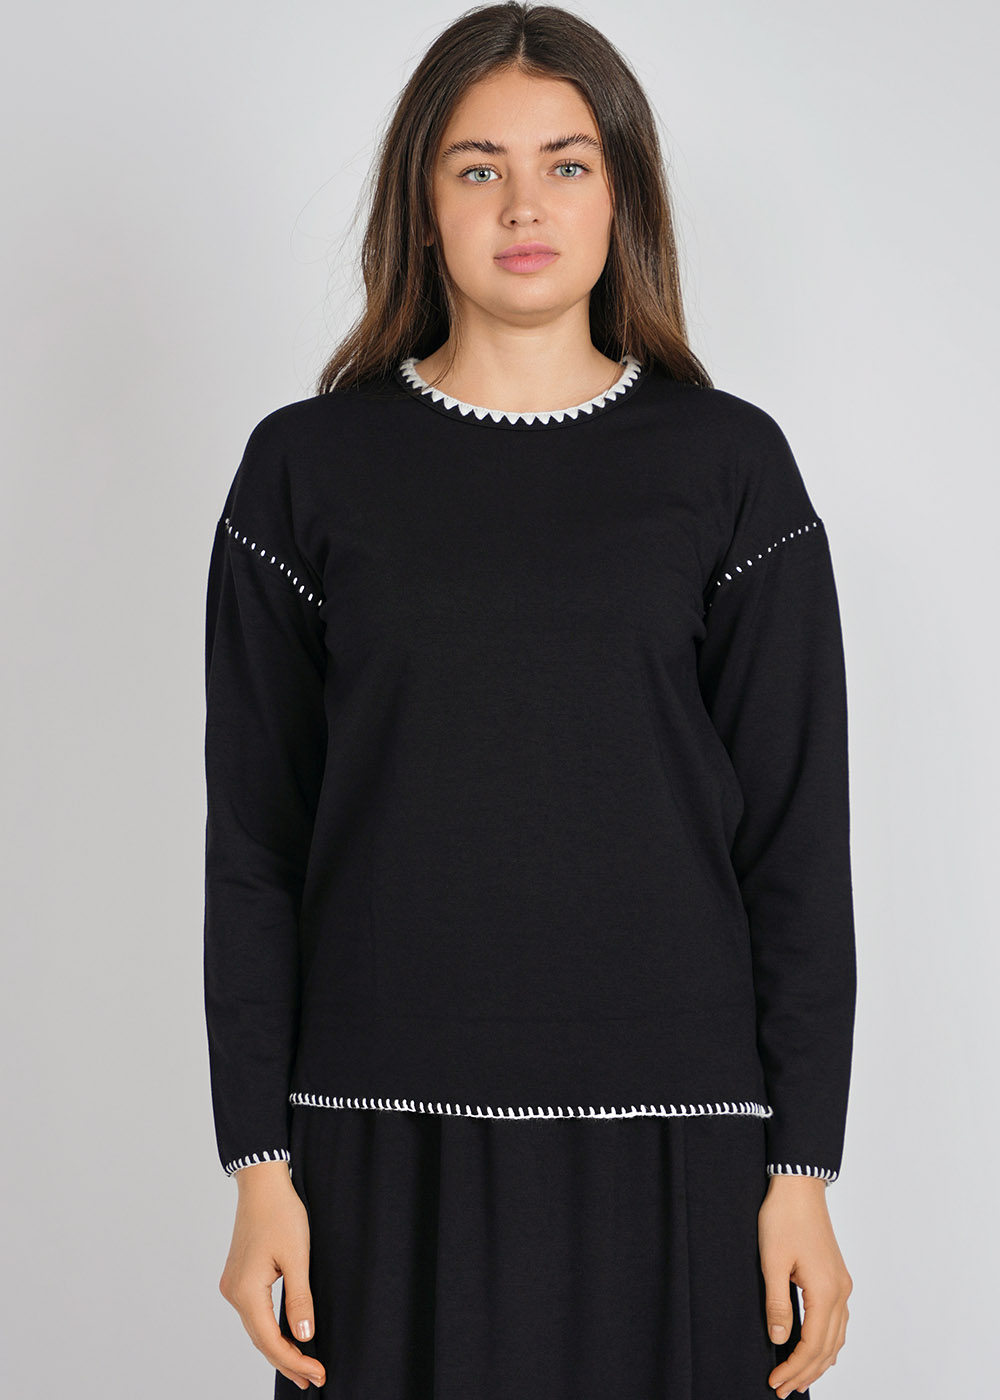 Classic Black Knit T-Shirt with White Outline